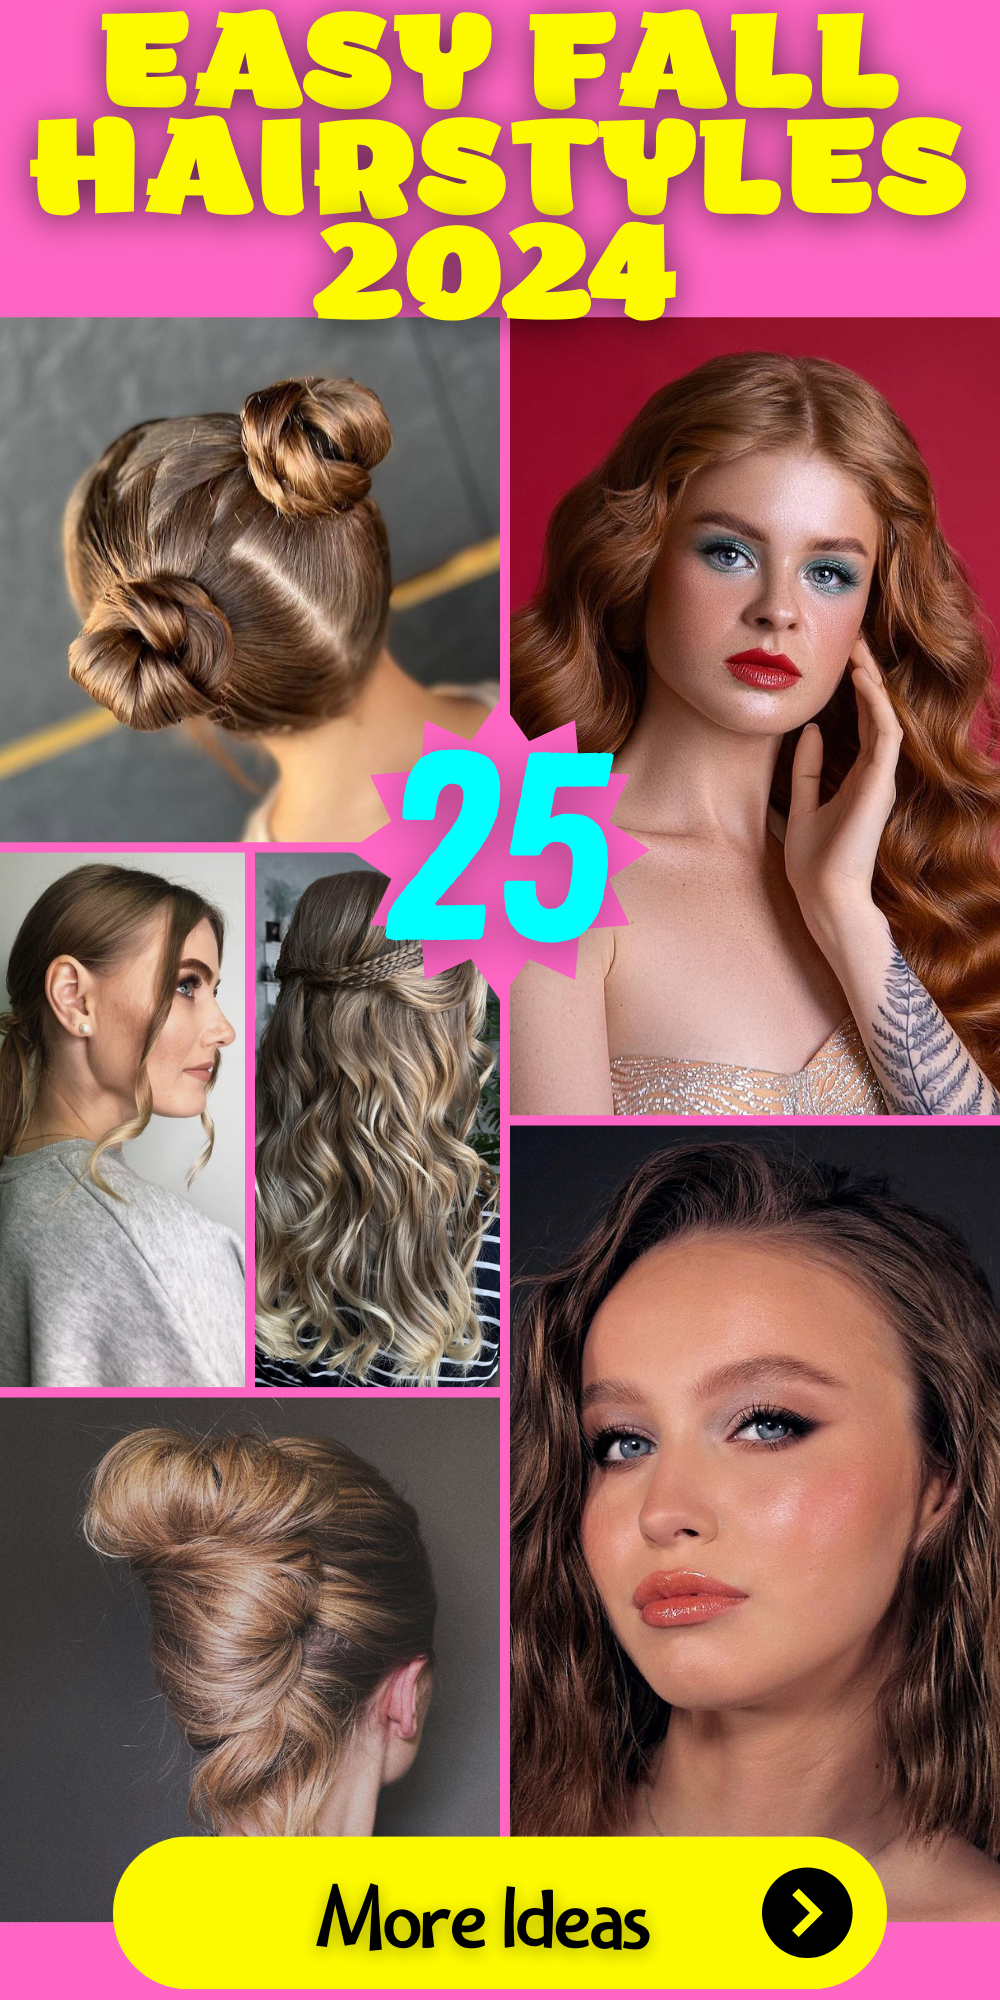 25 Easy Fall Hairstyles 2024: Trendy and Simple Ideas